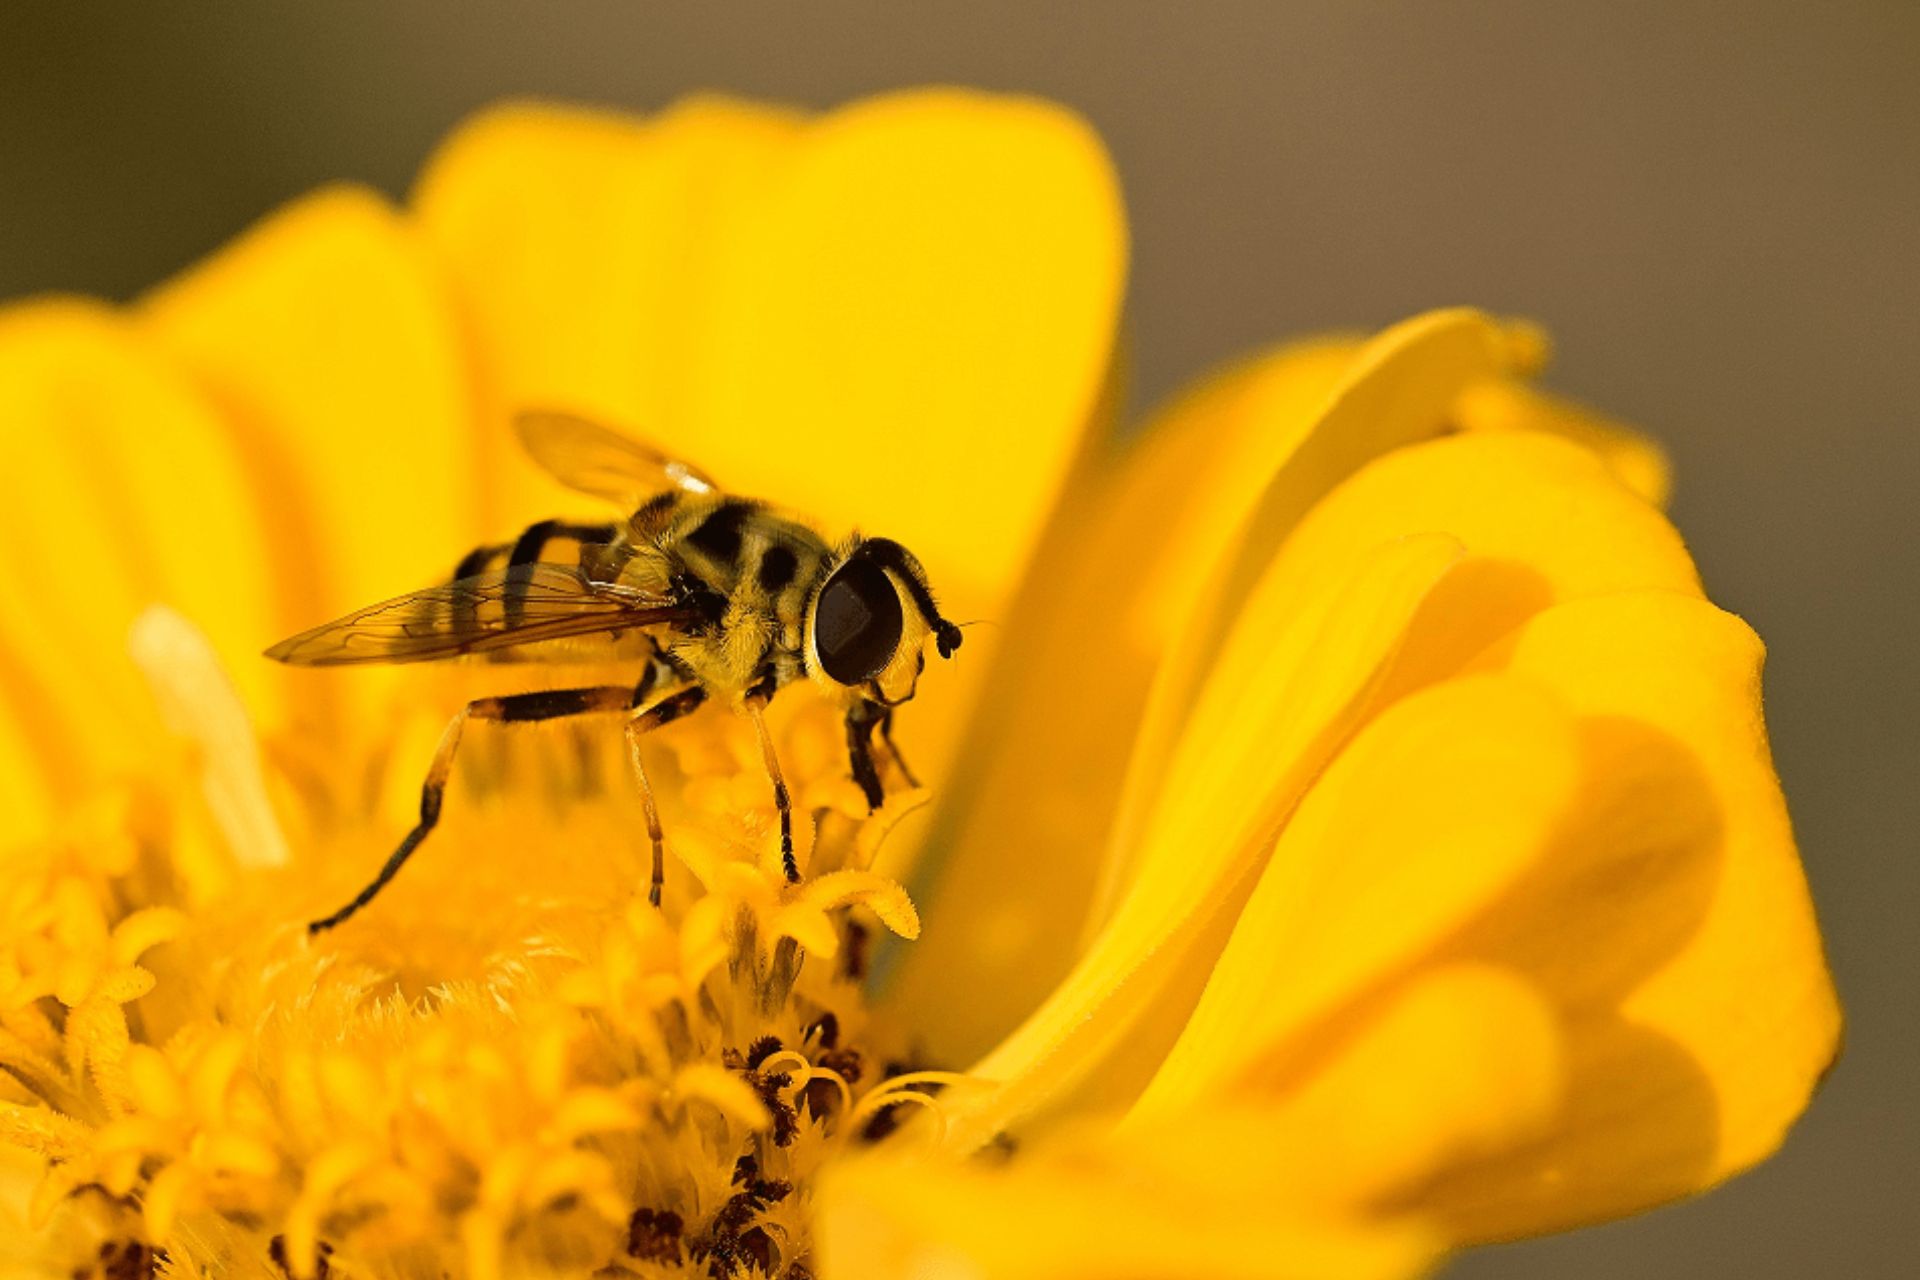 Assiax to relaunch the Queen Bee biodiversity Contest